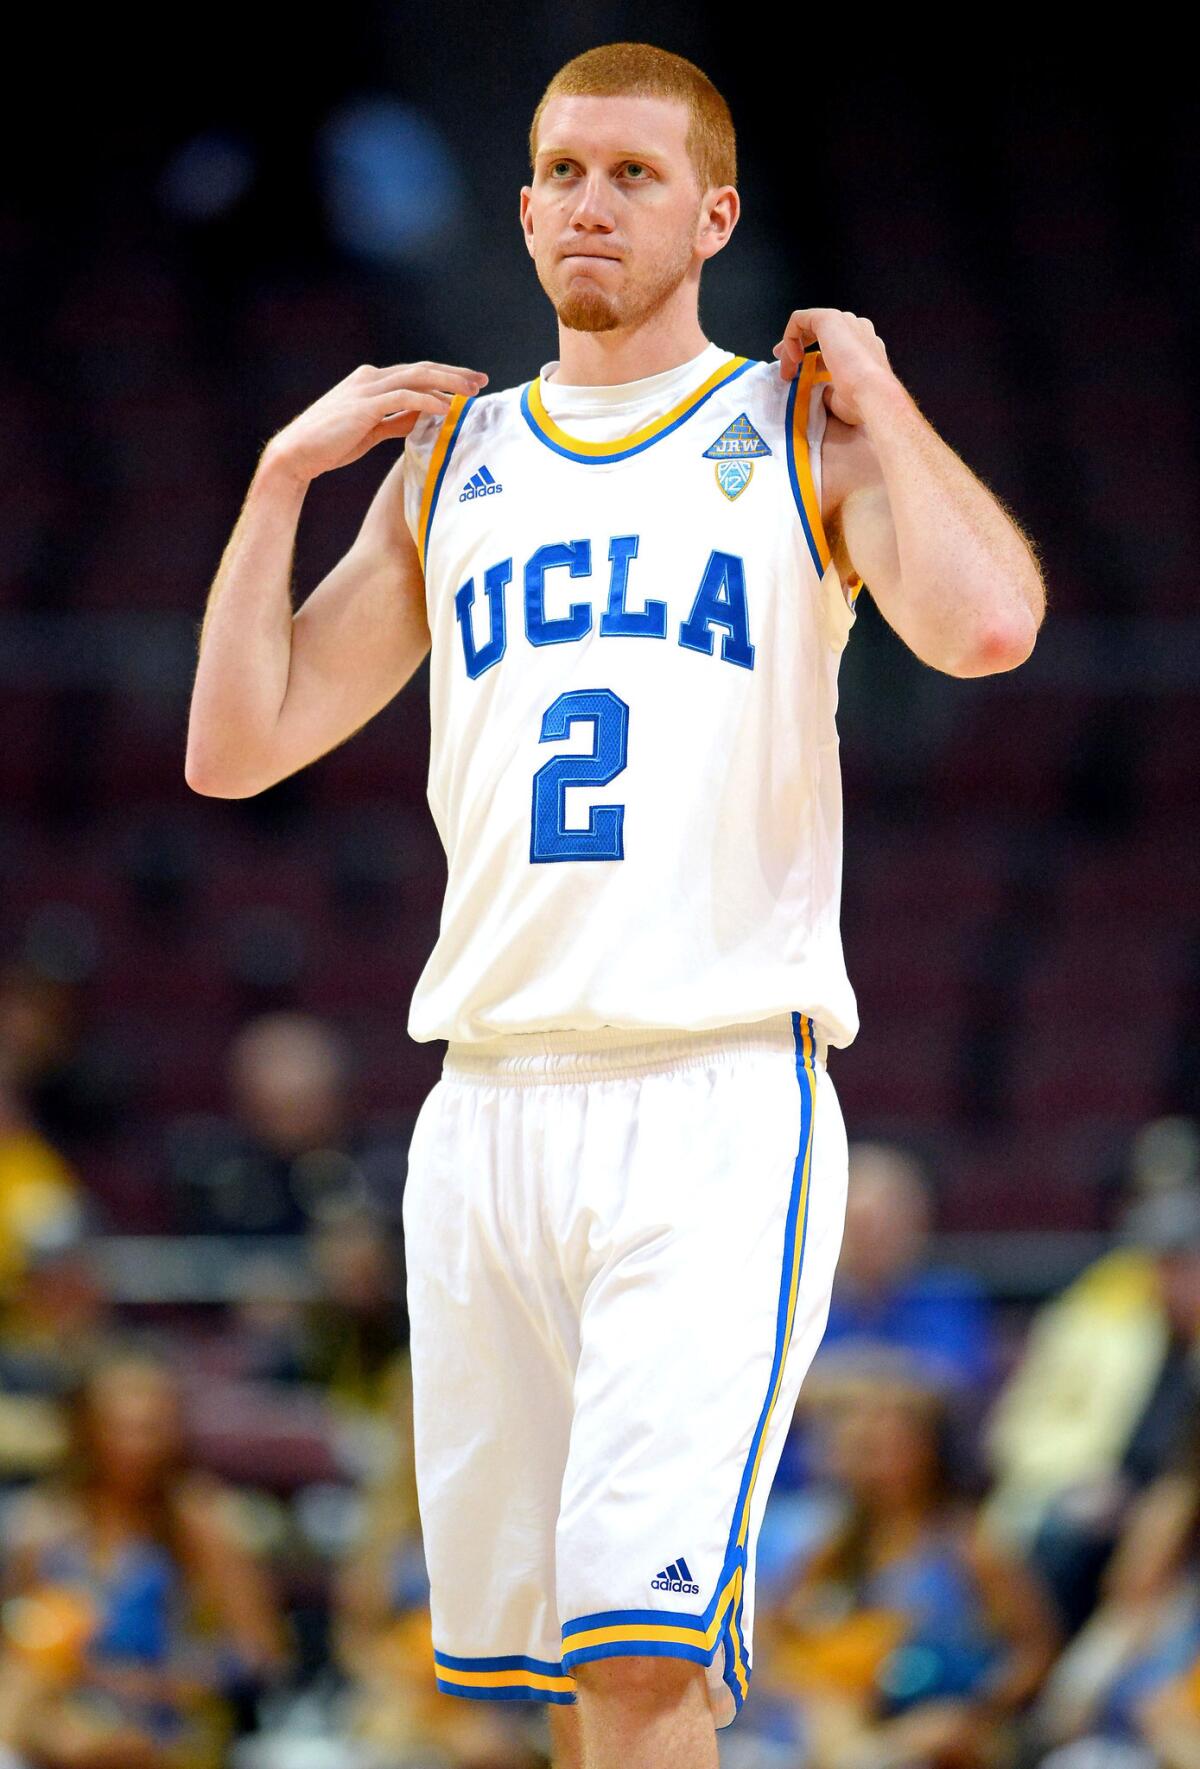 Kory Alford doesn't get a lot of playing time for UCLA but is valued for his maturity. He plans to follow his father into coaching.